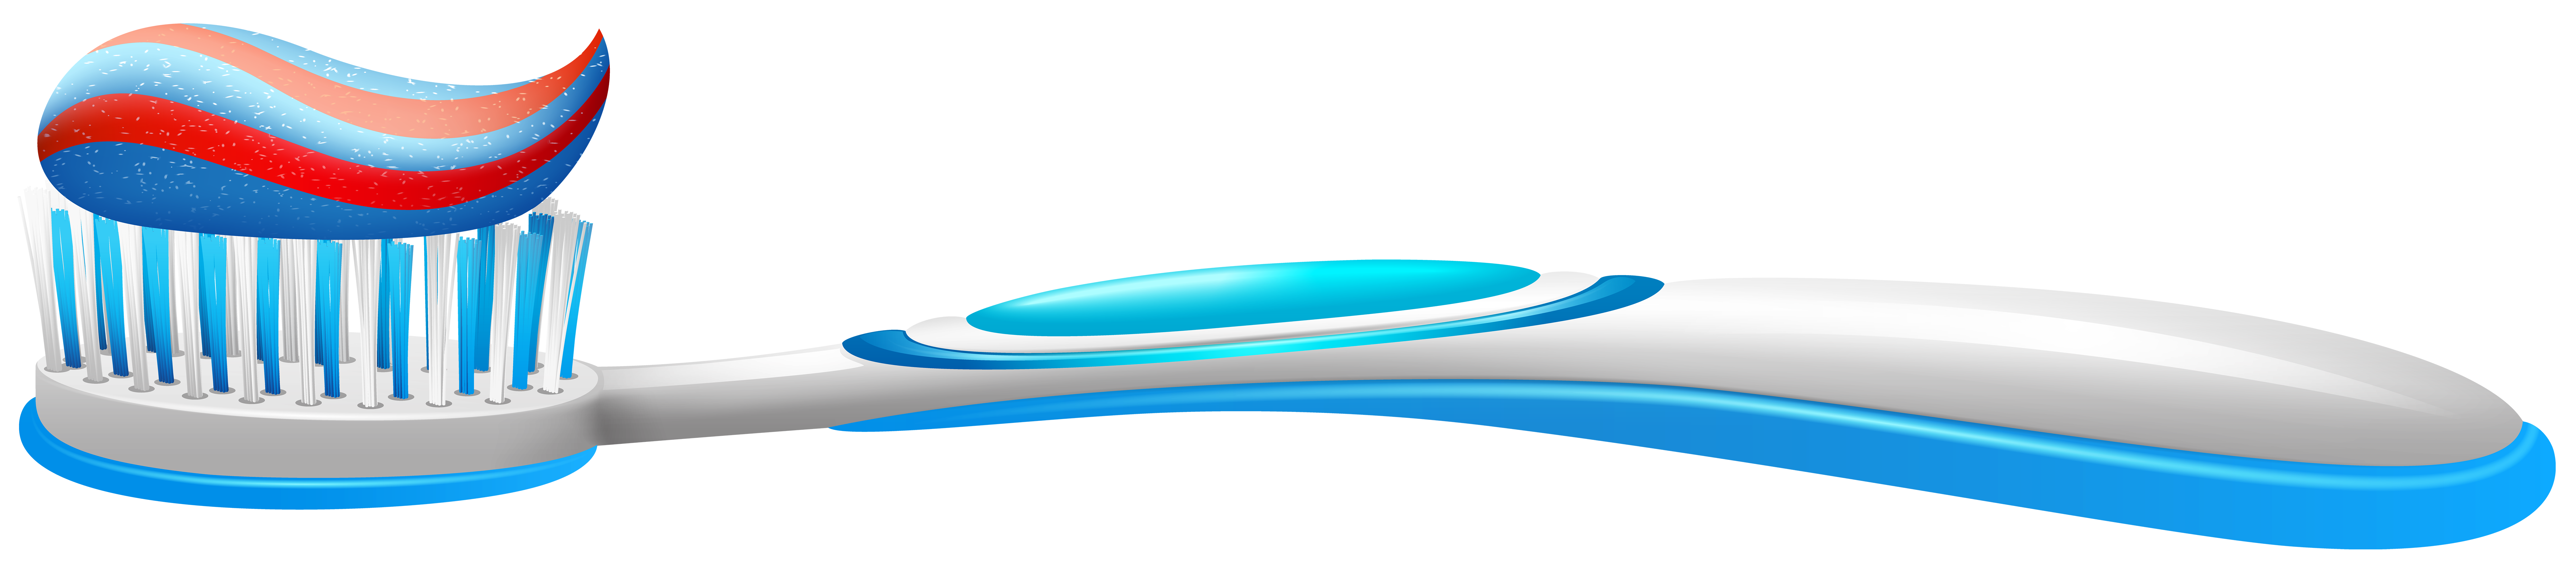 toothbrush clipart - photo #35